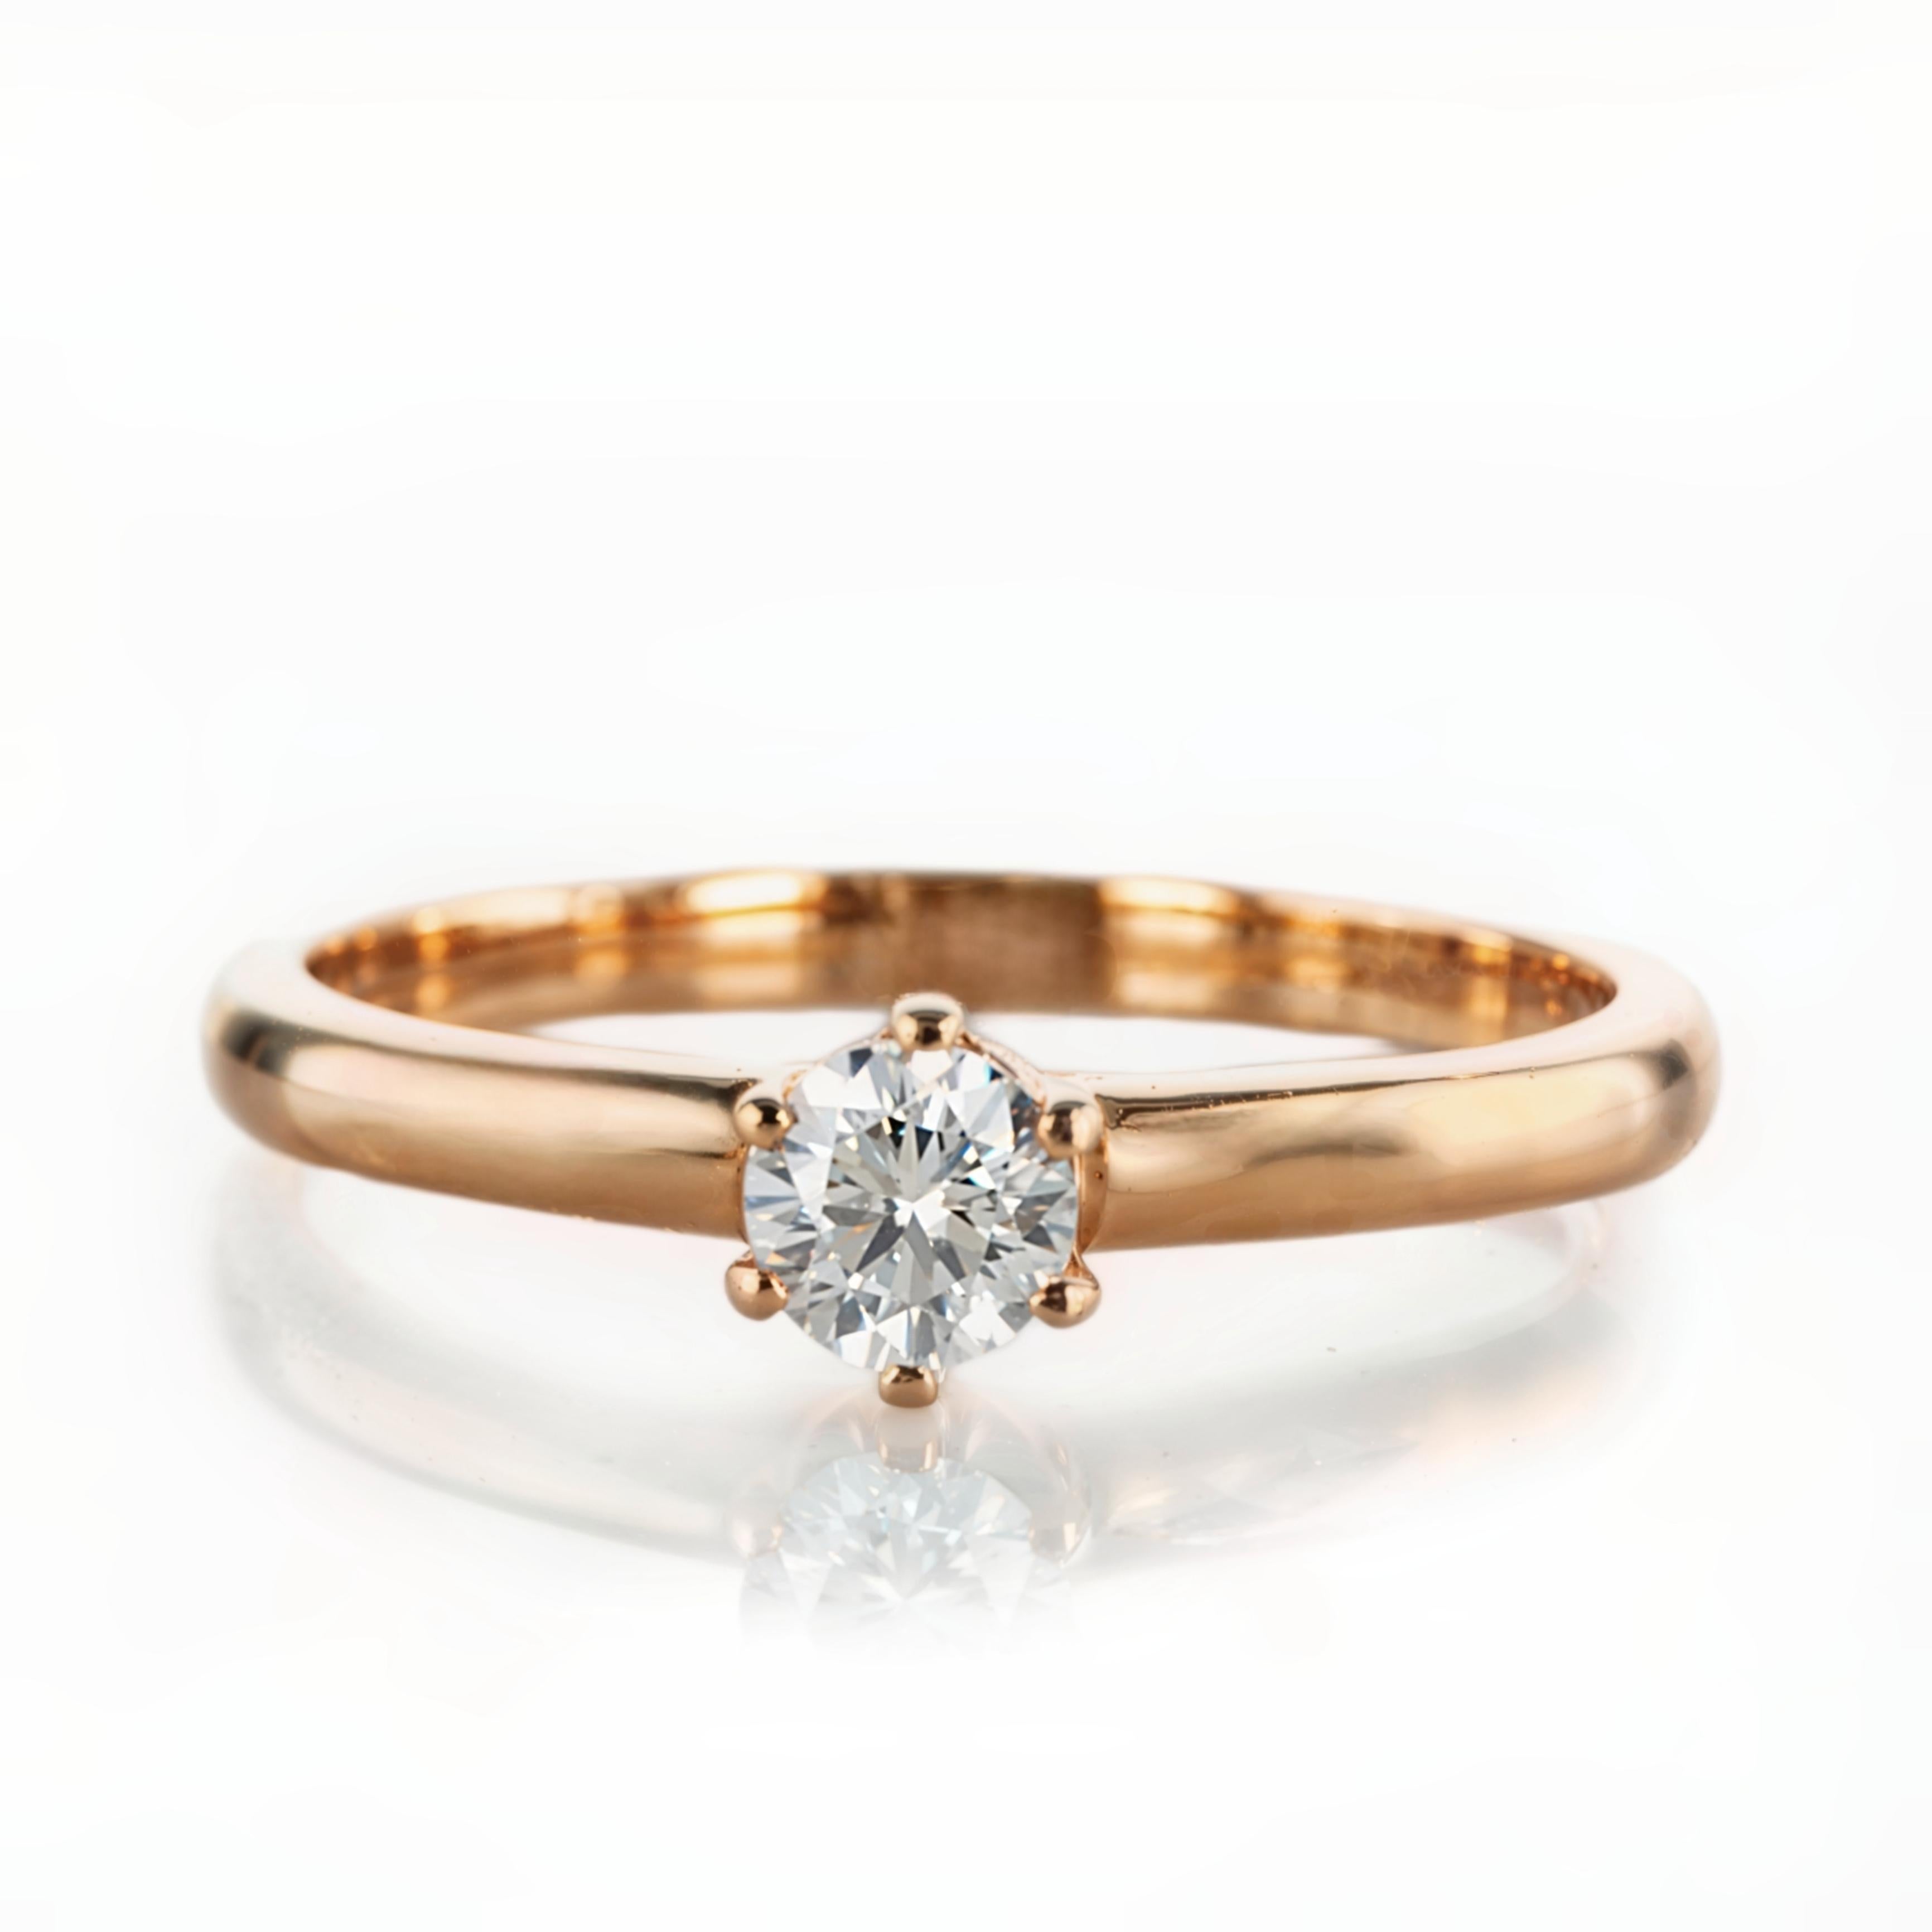 For Sale:  Stunning Classic 0.25 Carat Diamond Solitaire Ring in 14K Gold 14